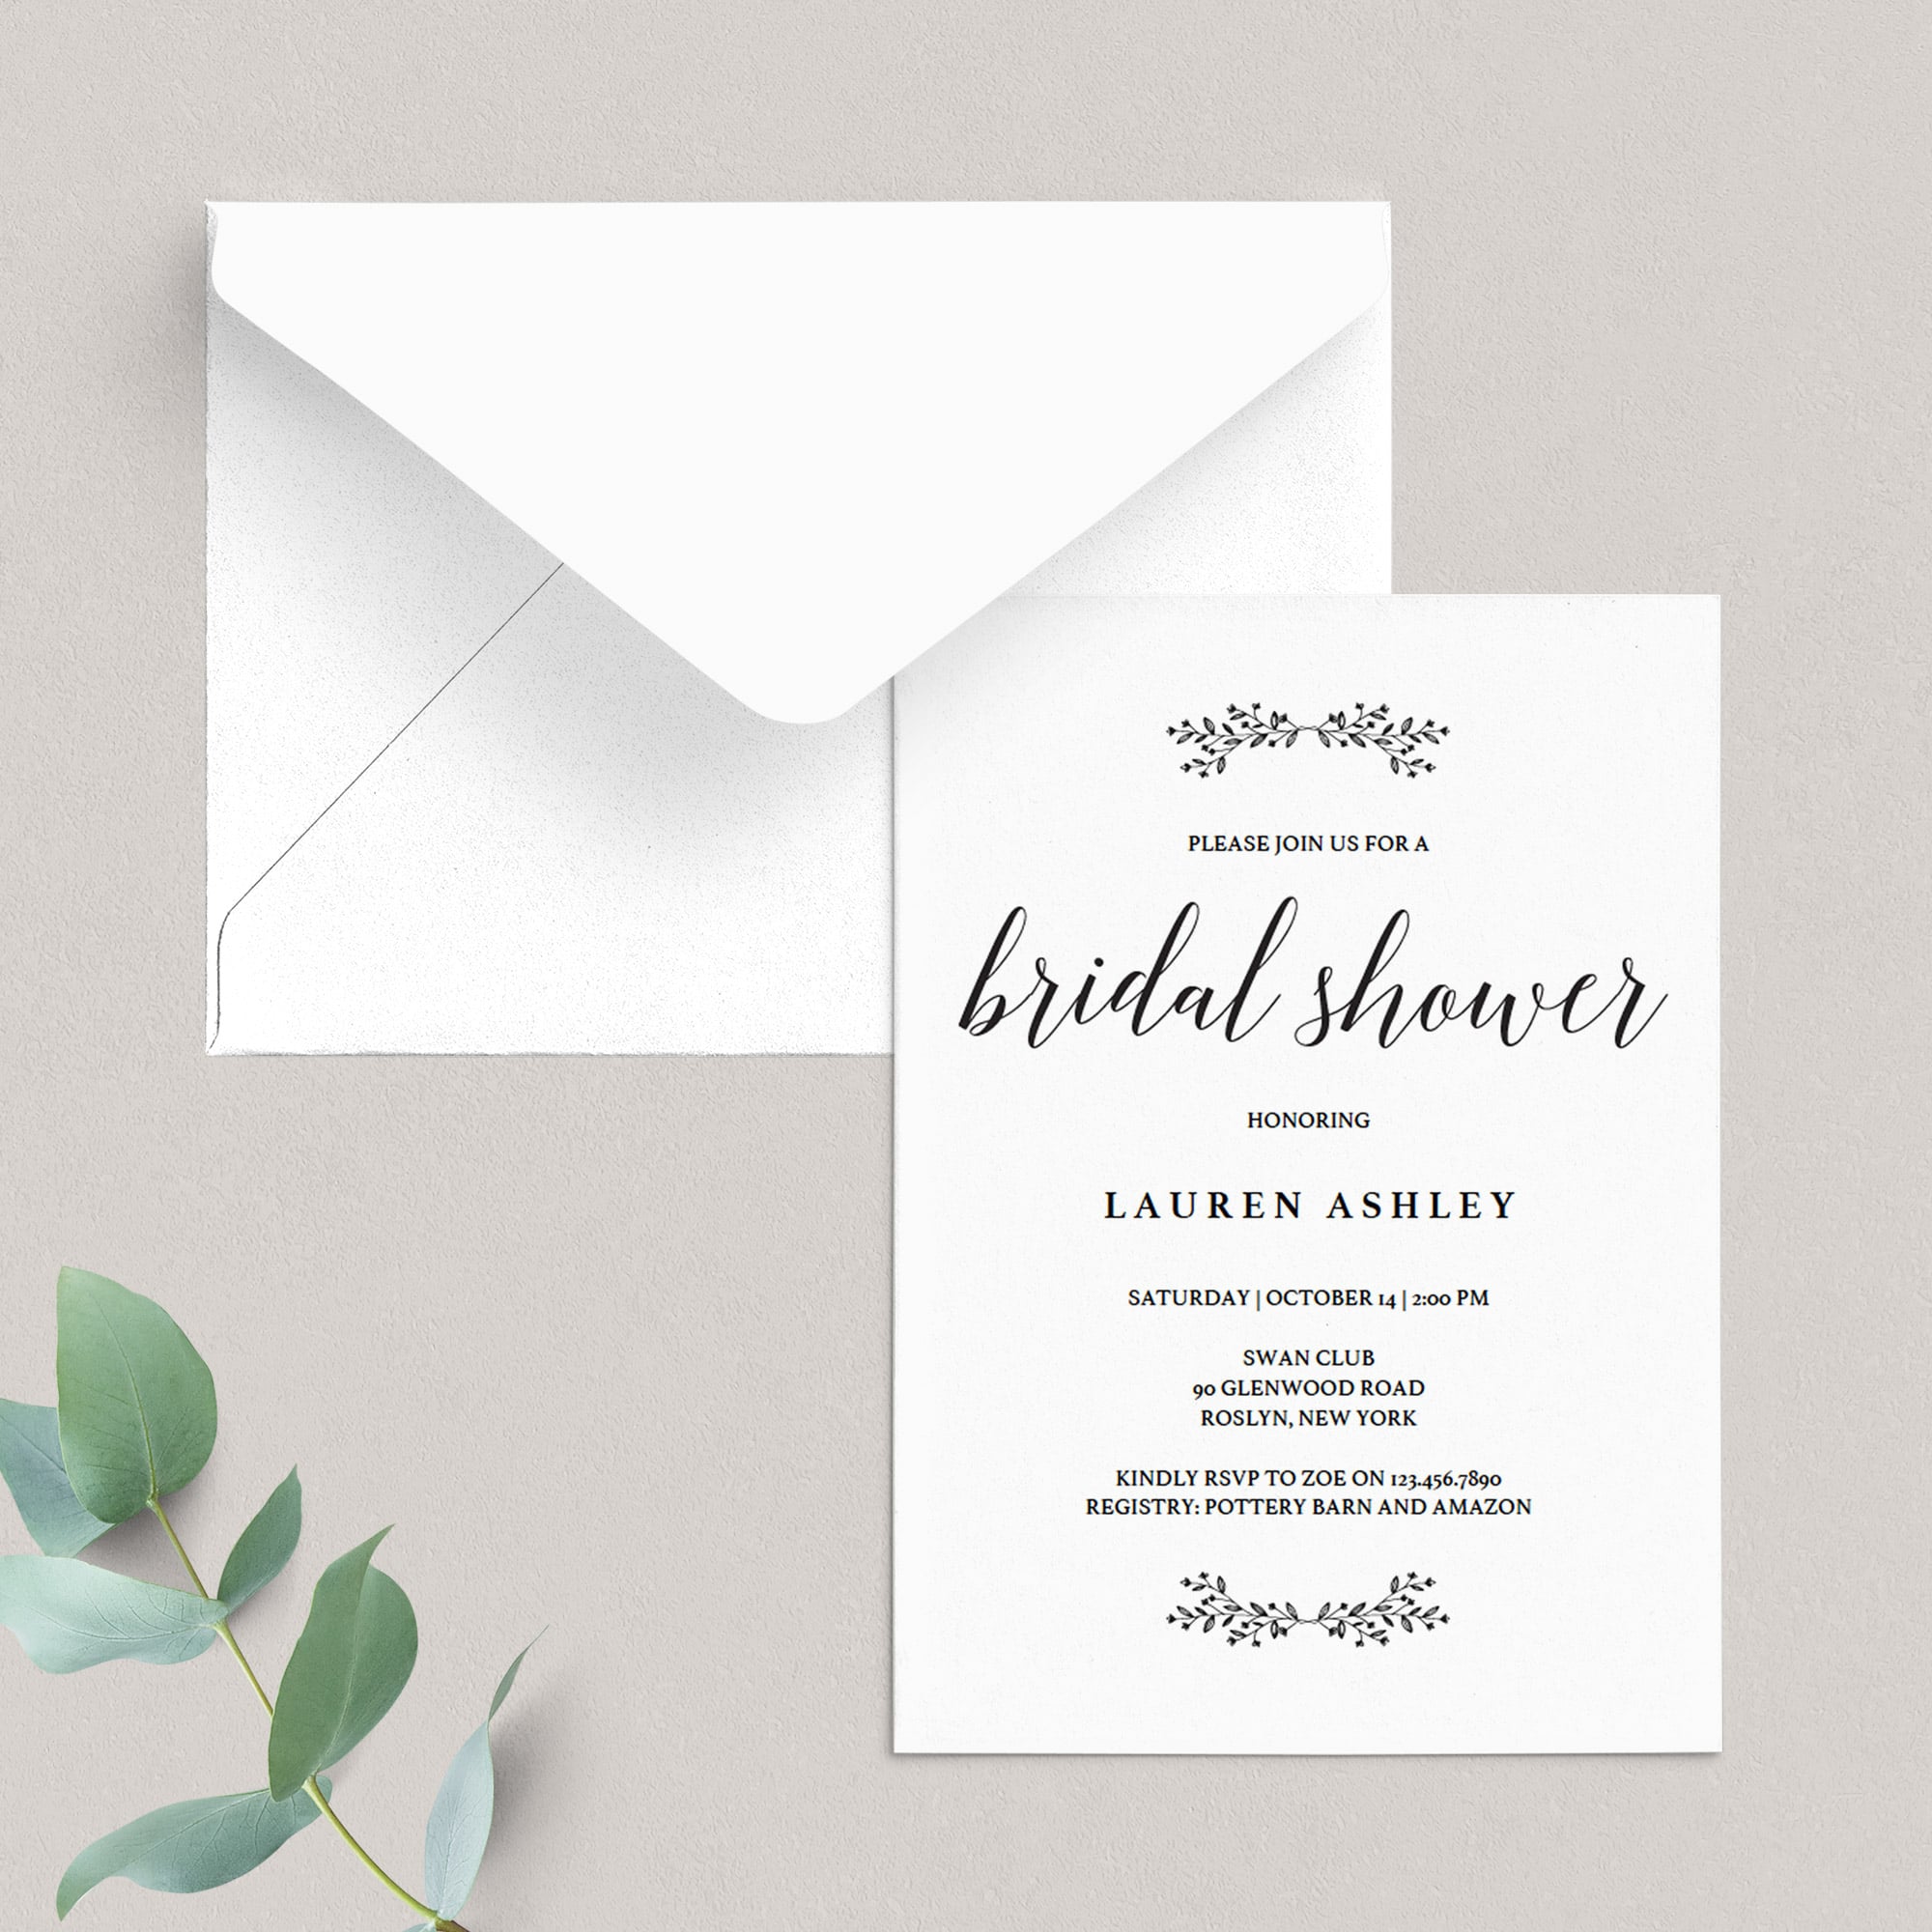 Rustic chic bridal shower invitation by LittleSizzle